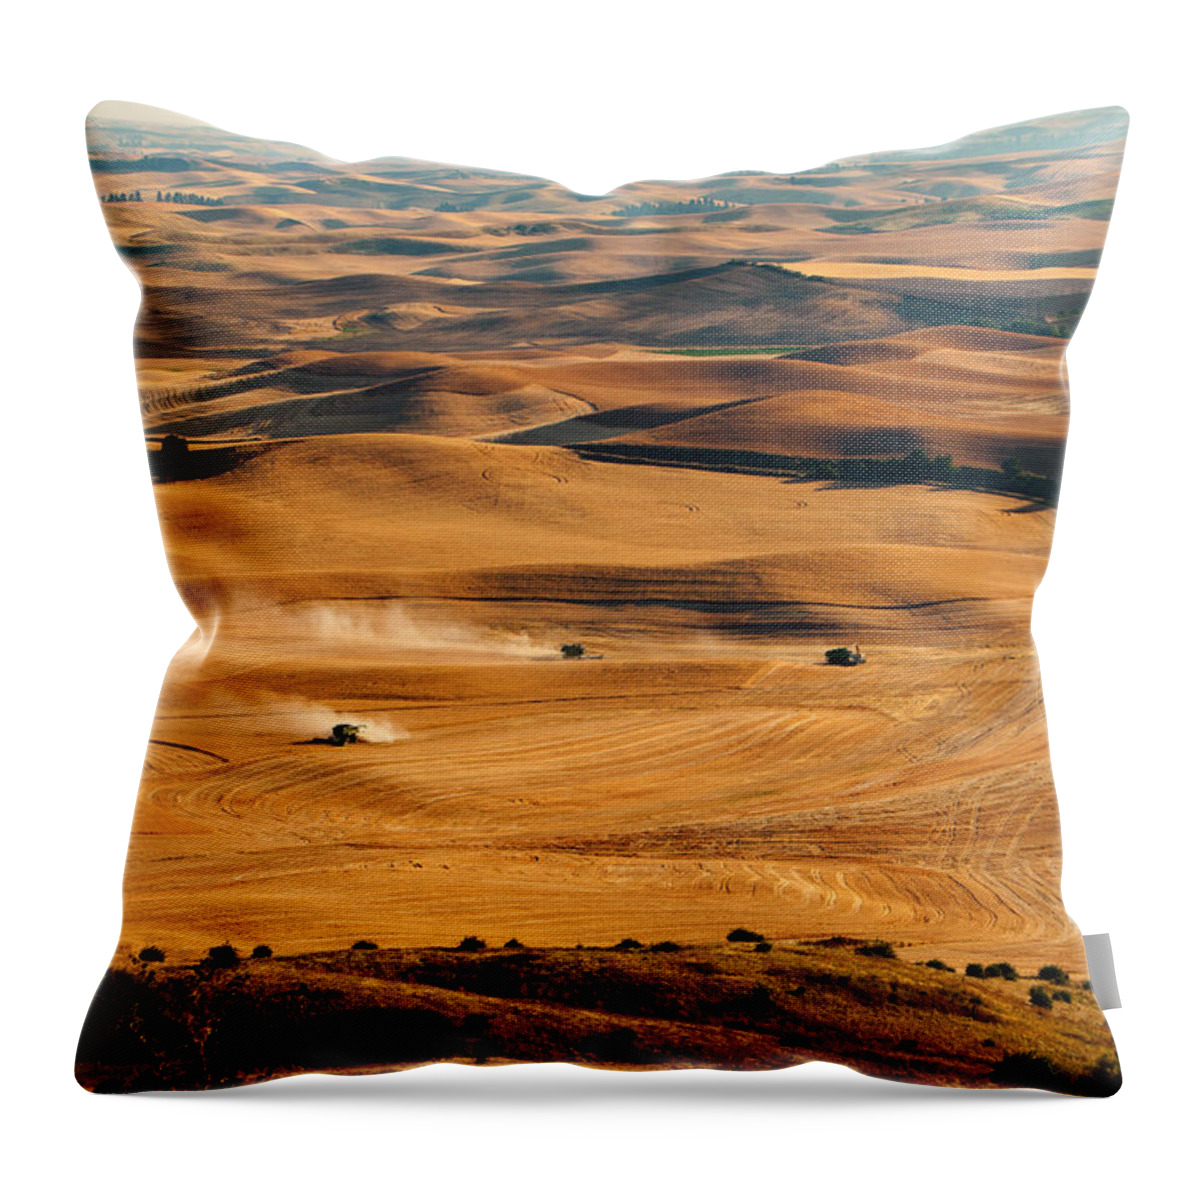 Harvest Throw Pillow featuring the photograph Harvest Overview by Mary Jo Allen